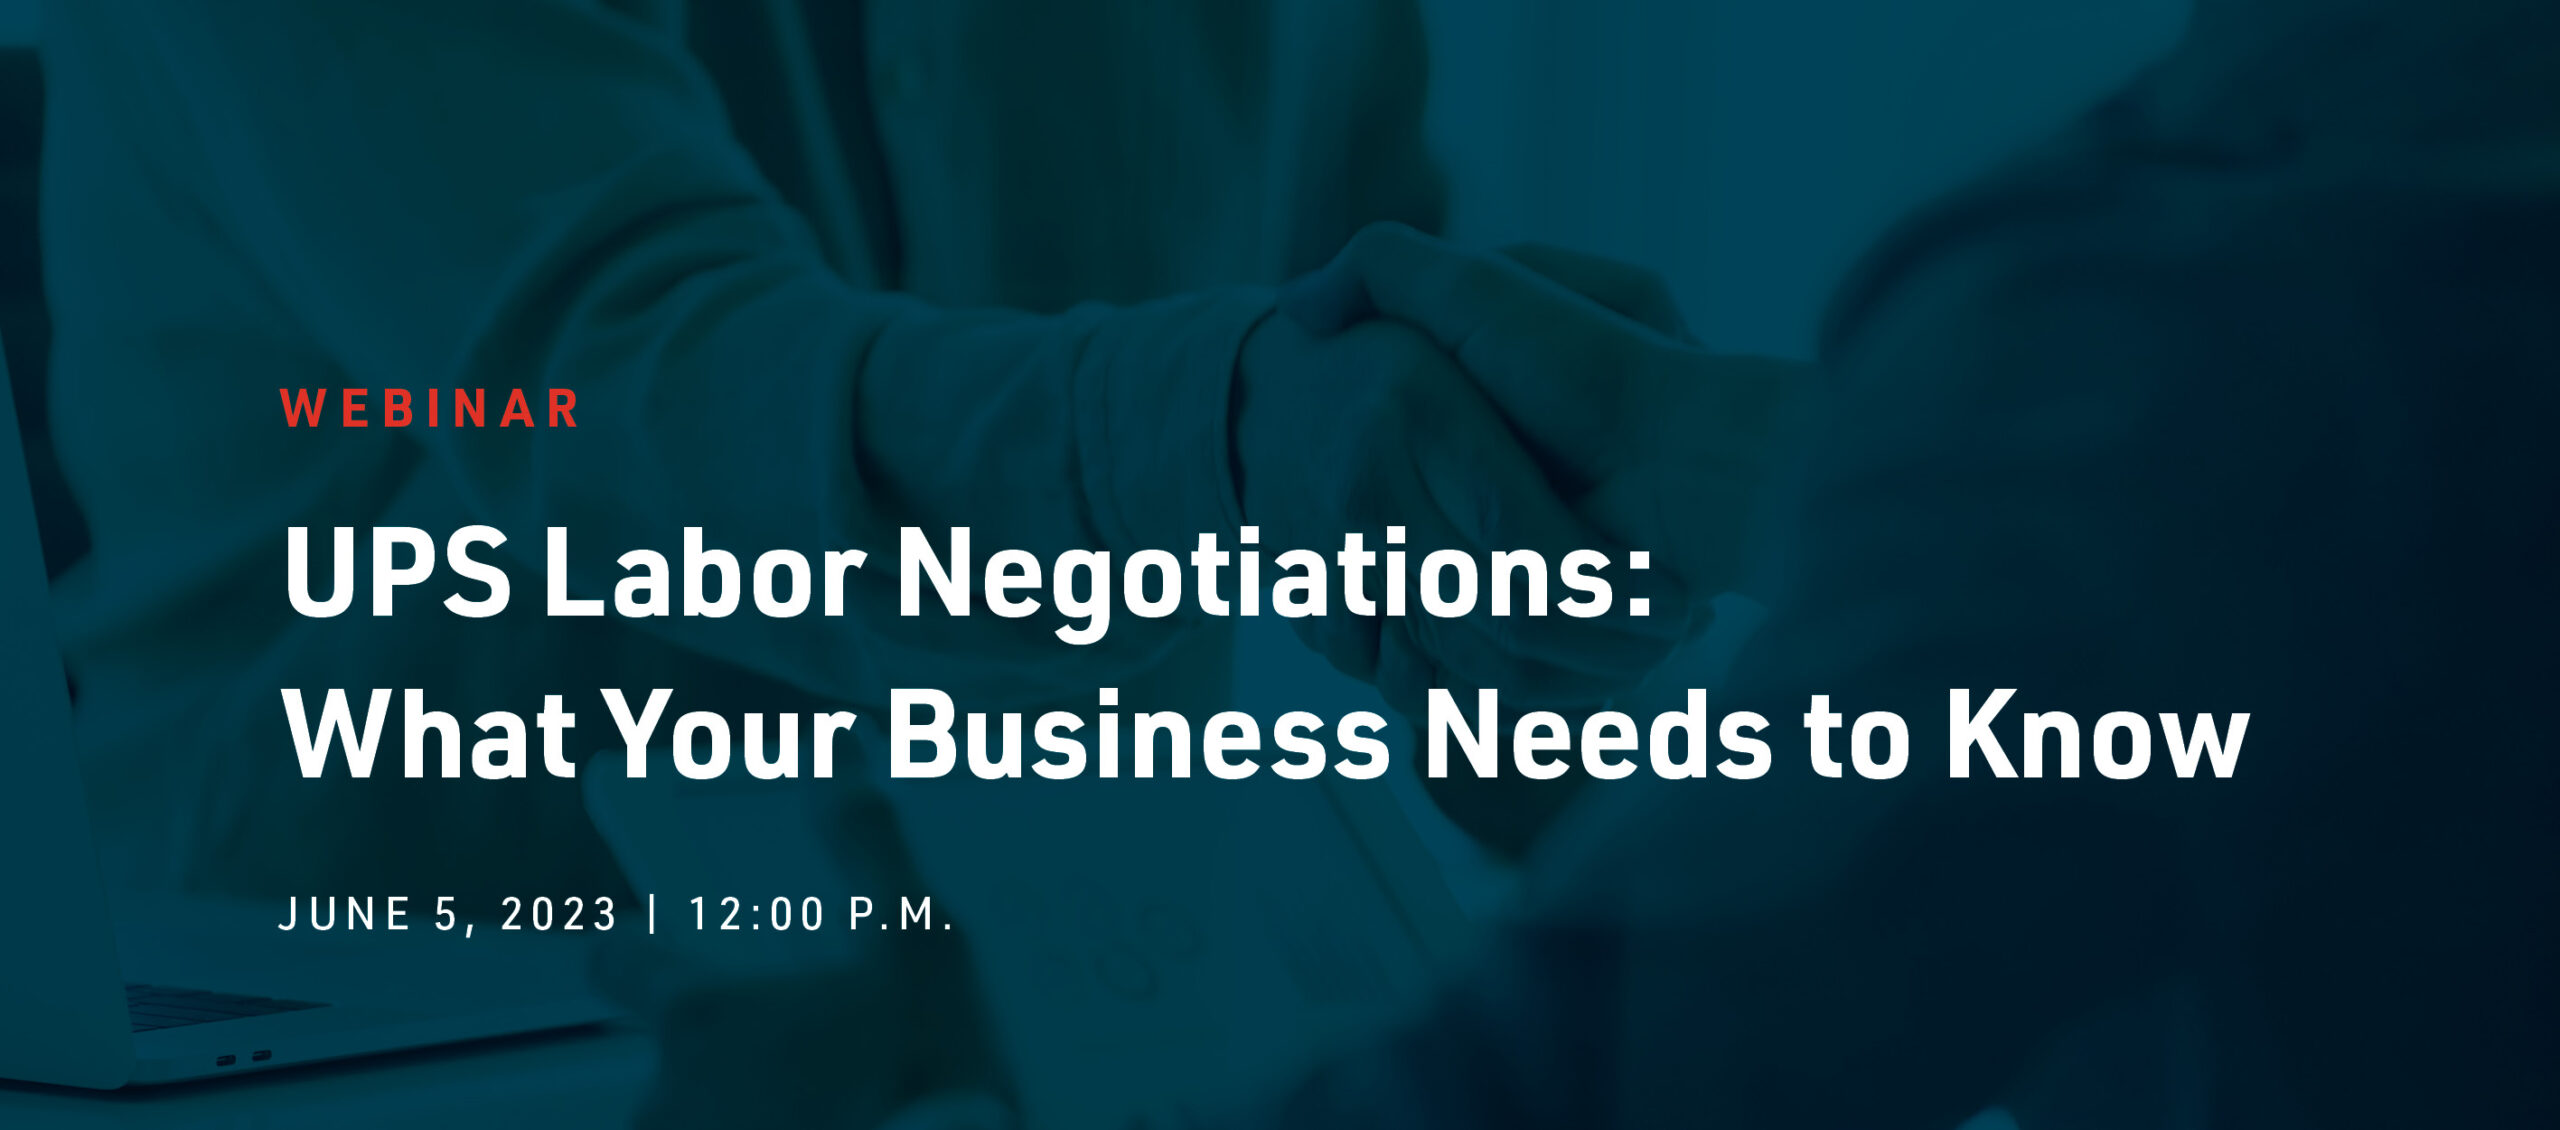 Webinar "UPS Labor Negotiations What Your Business Needs to Know